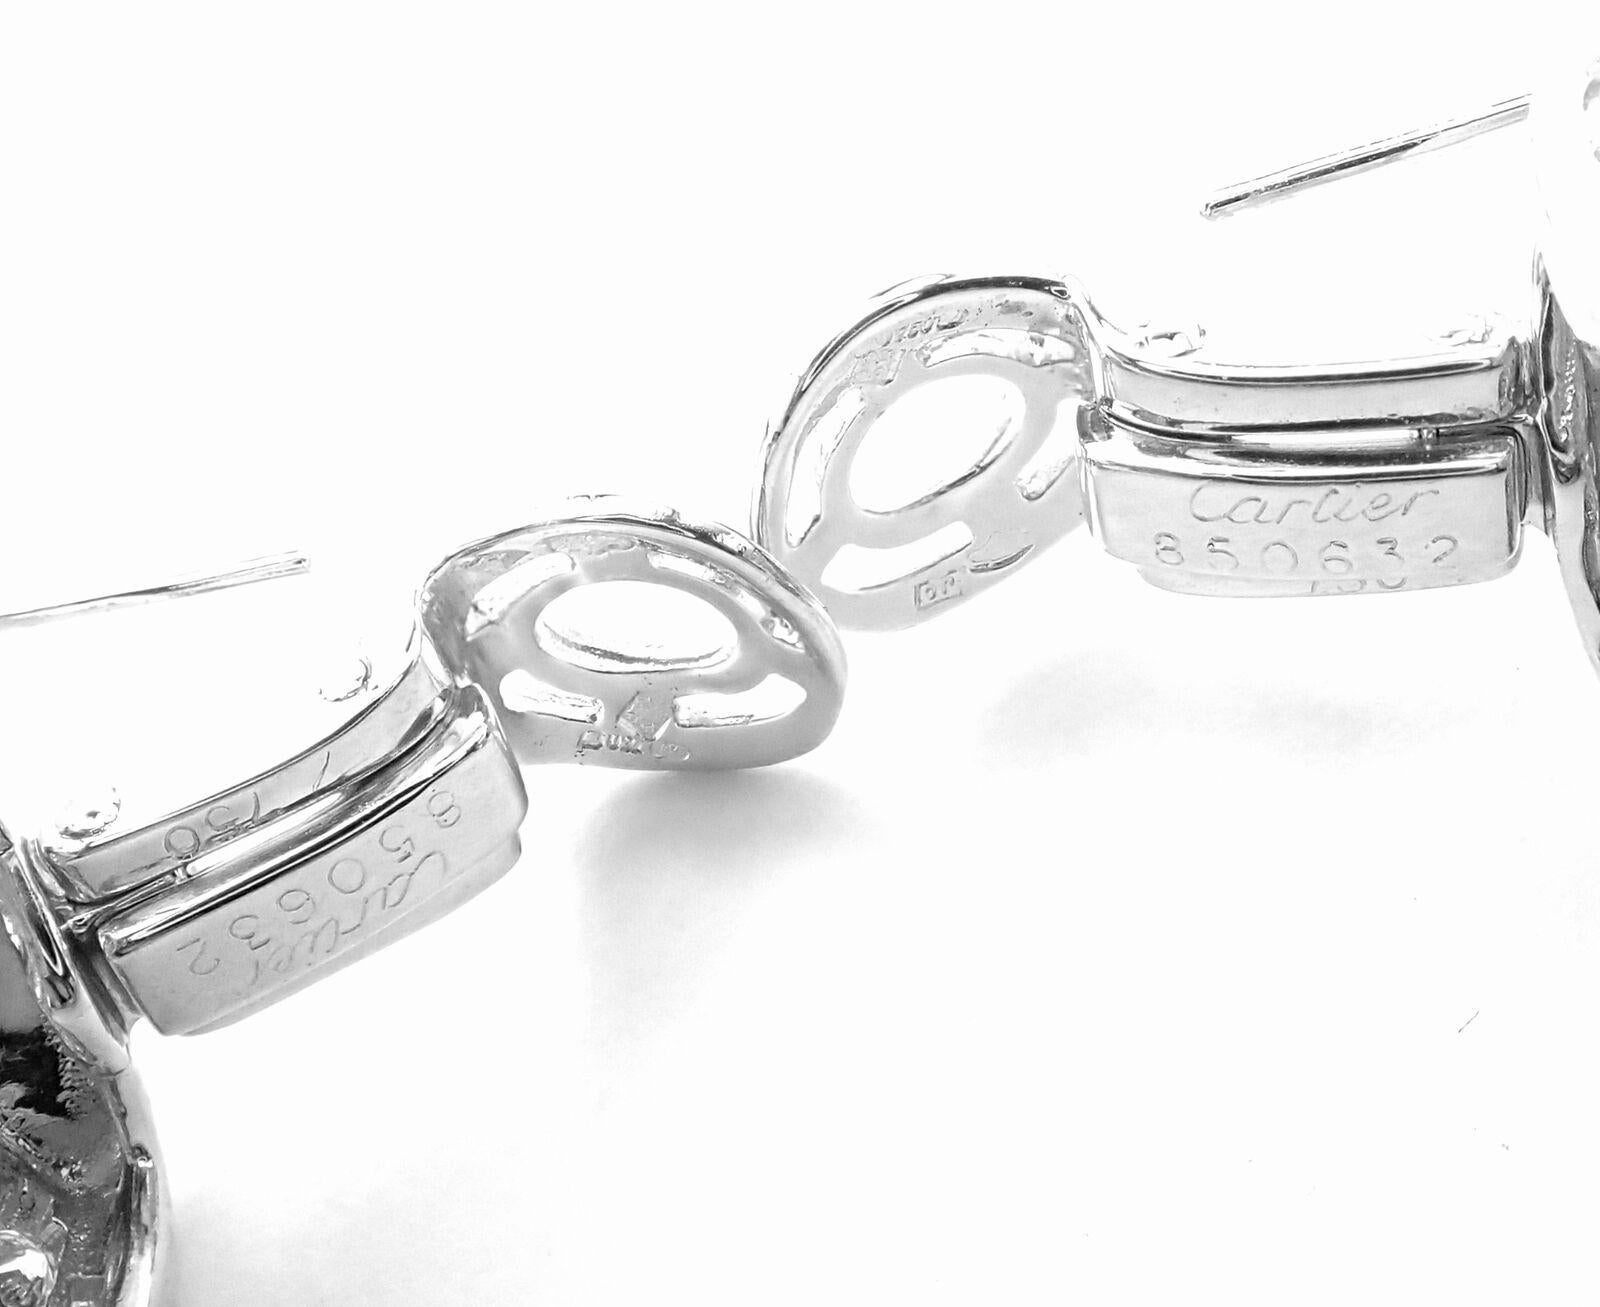 Cartier 20ct Diamond Inside Out White Gold Large Hoop Earrings 2